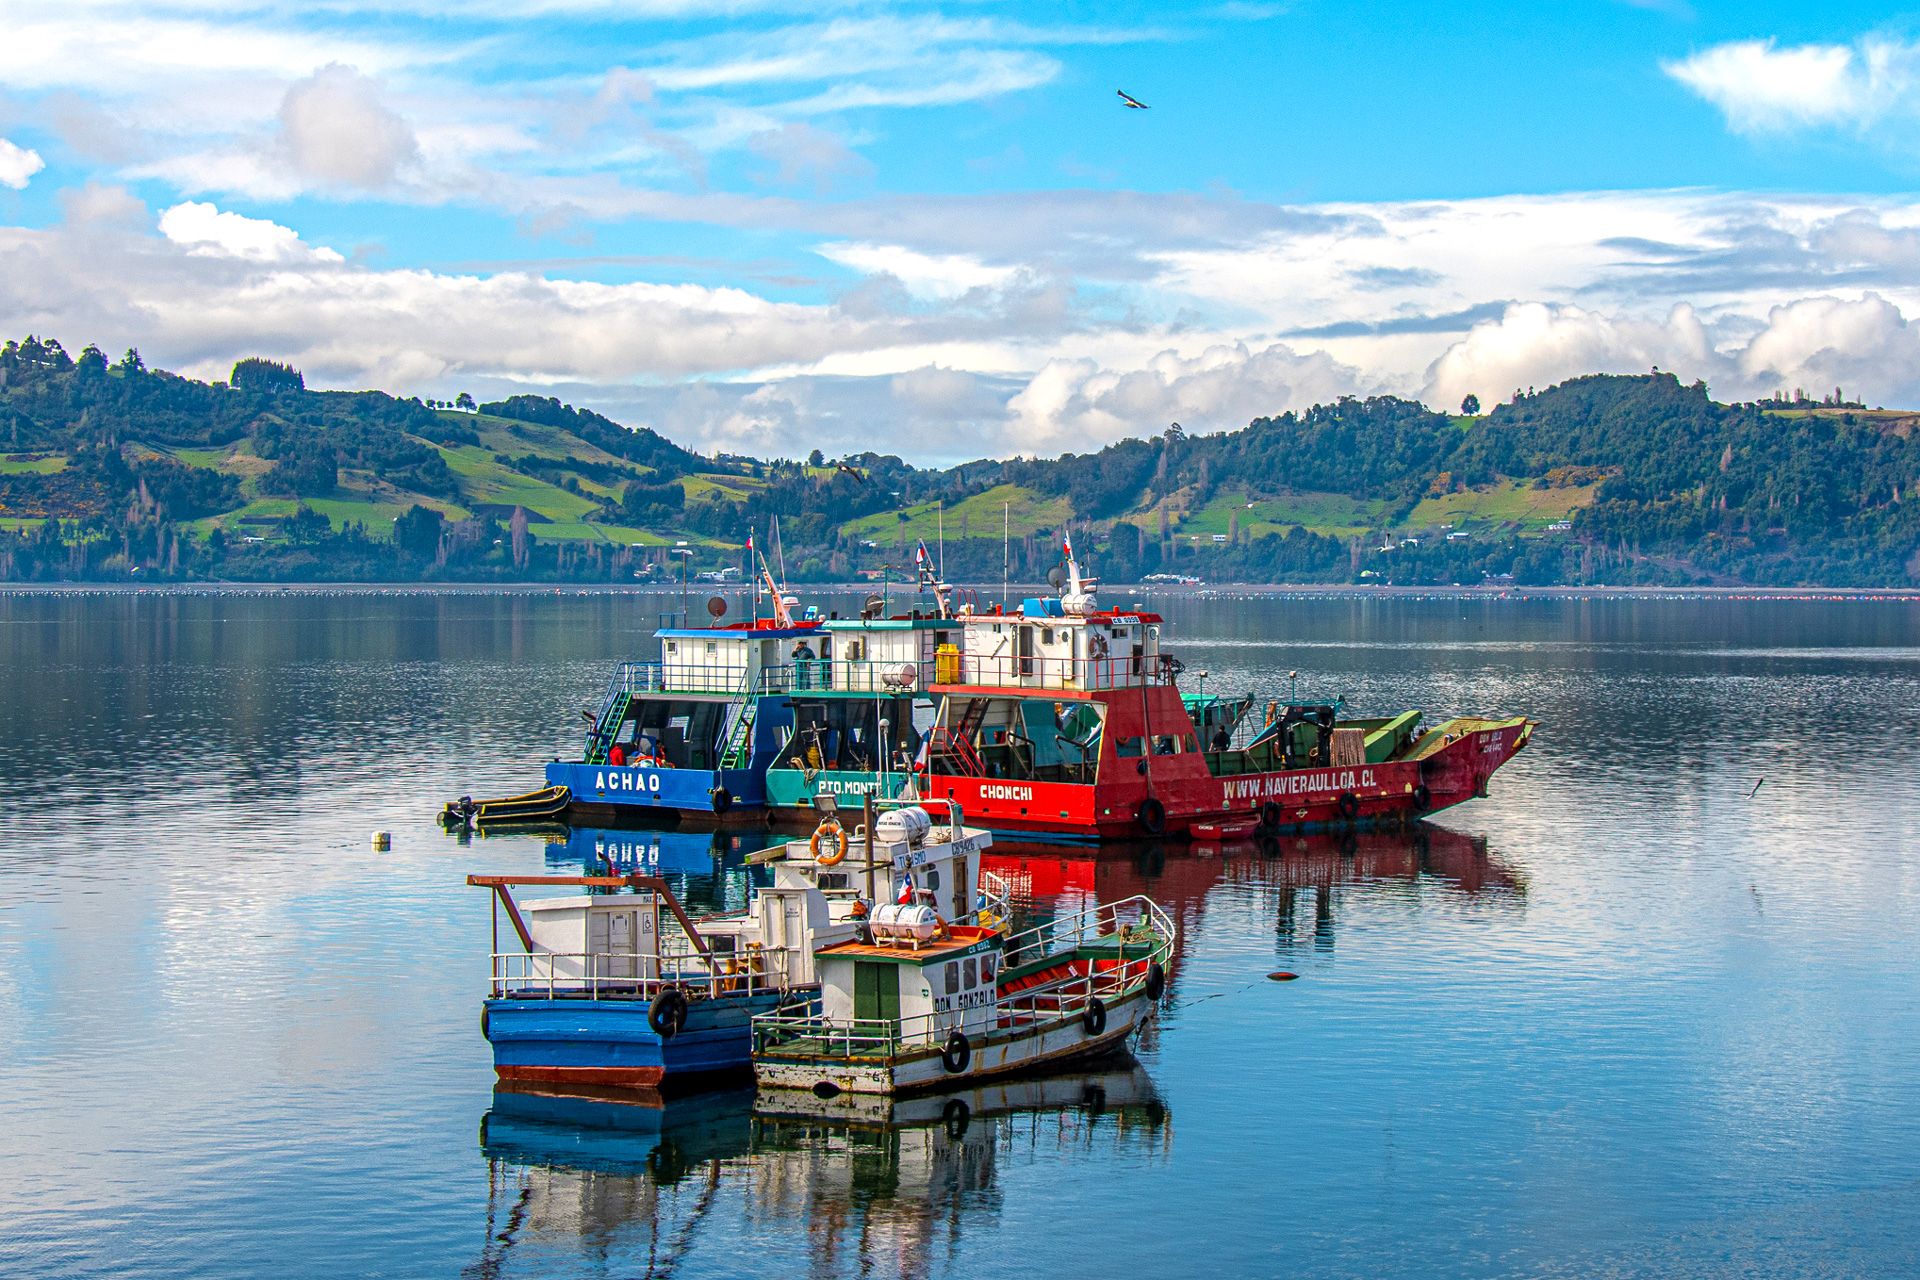 Little Fishing Boats in Chonchi, Chiloe, Chile, South America